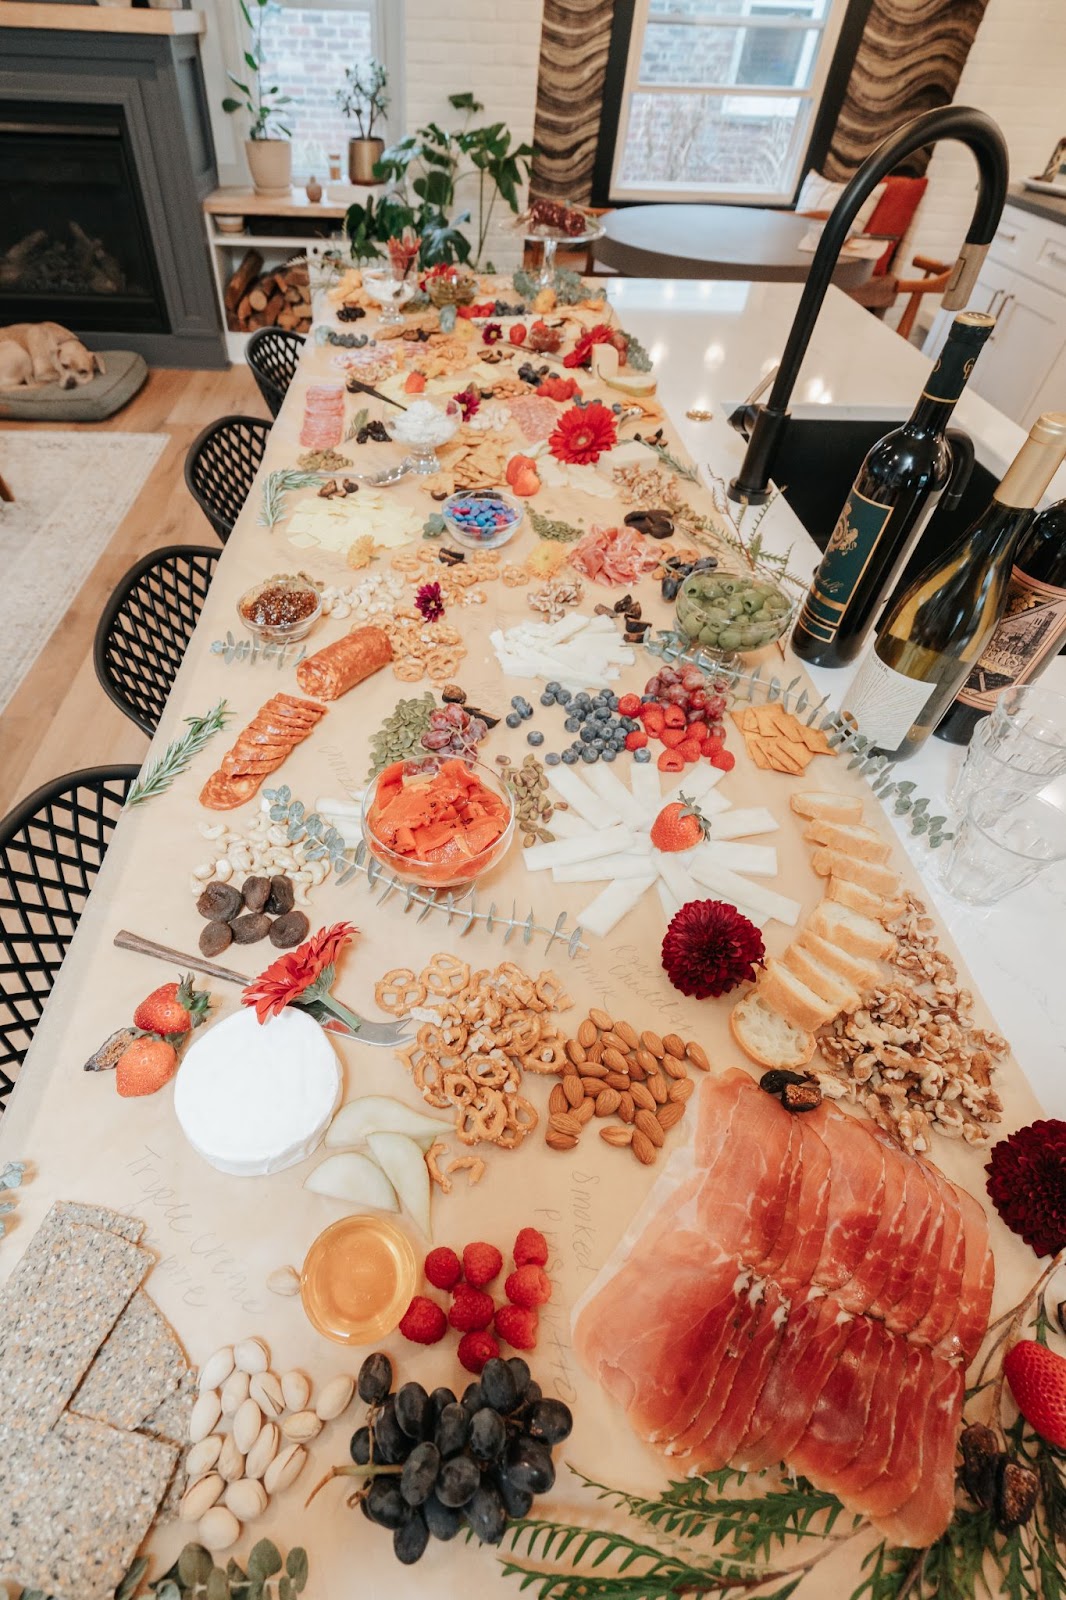 HOW TO MAKE A DAIRY + GLUTEN FREE CHARCUTERIE BOARD FOR THE HOLIDAYS image 9